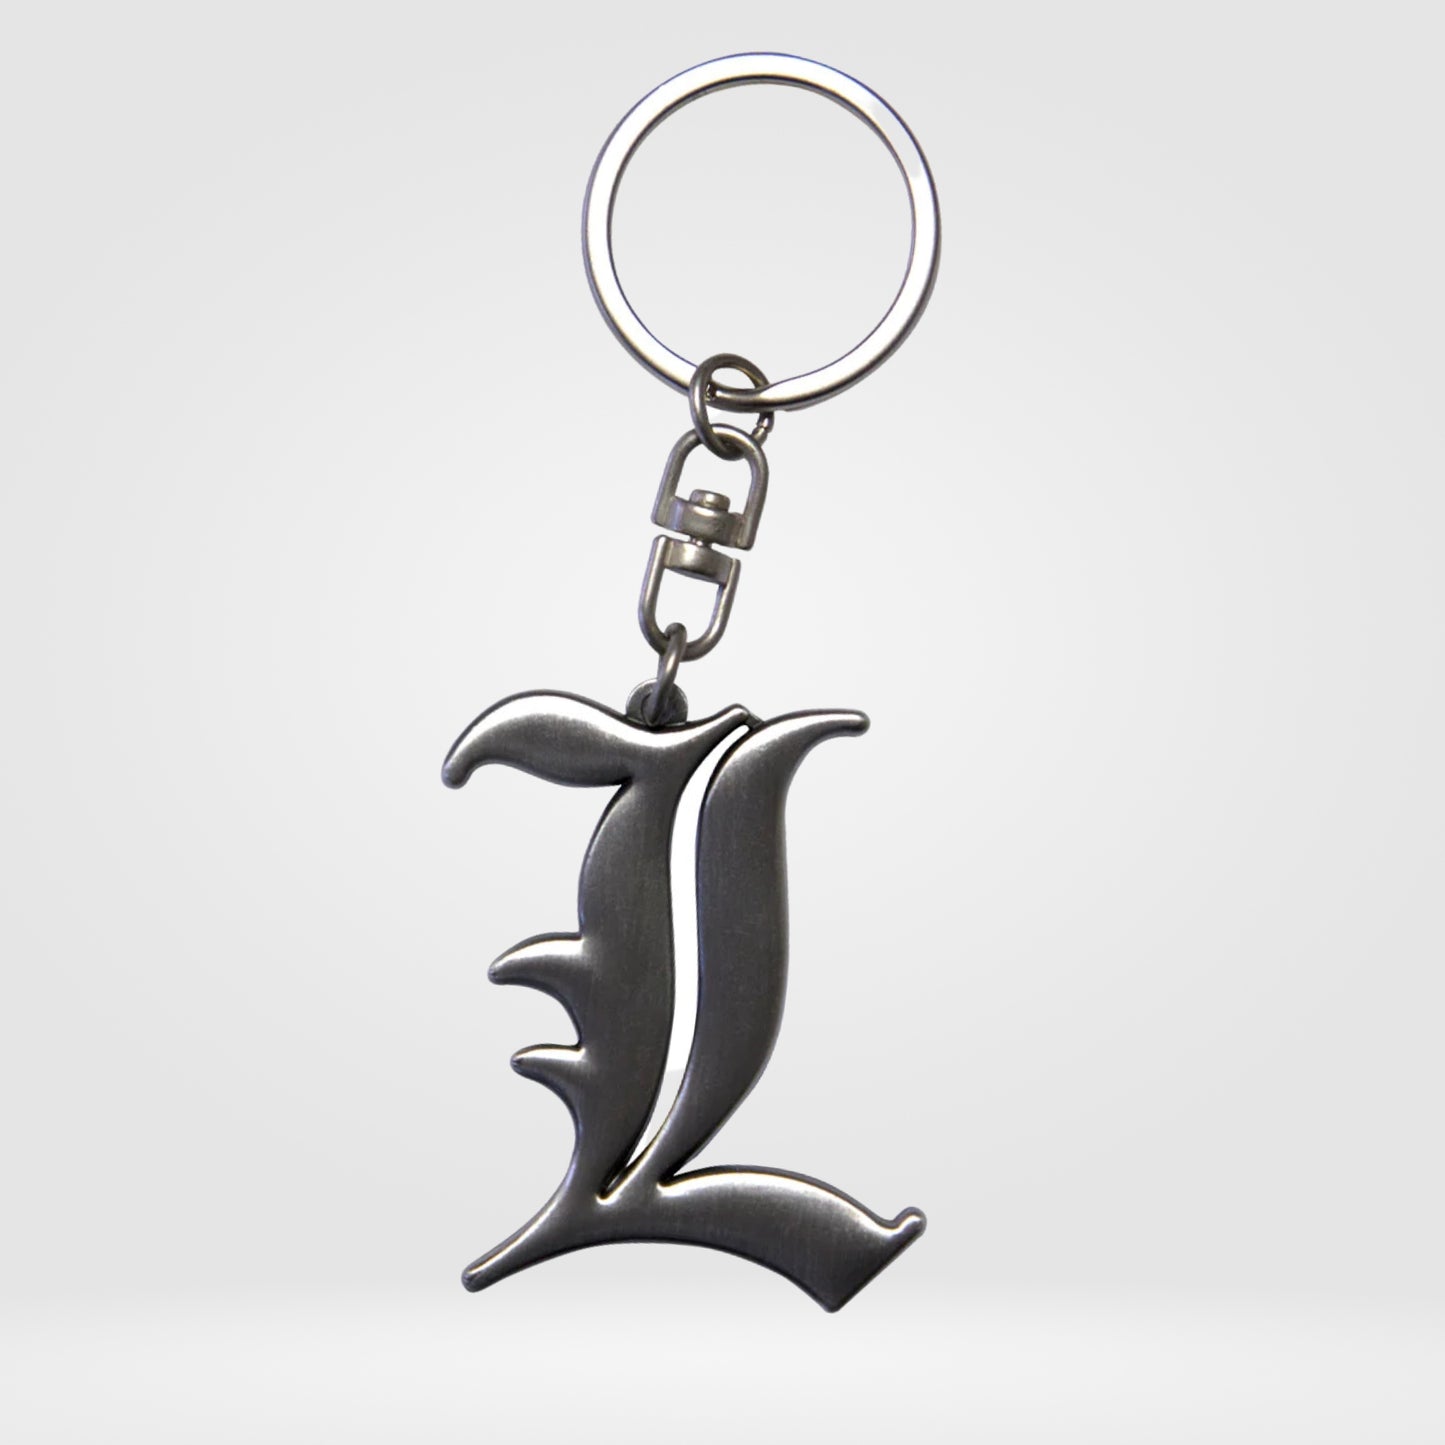 "L" Symbol (Death Note) Sculpted Metal Keychain